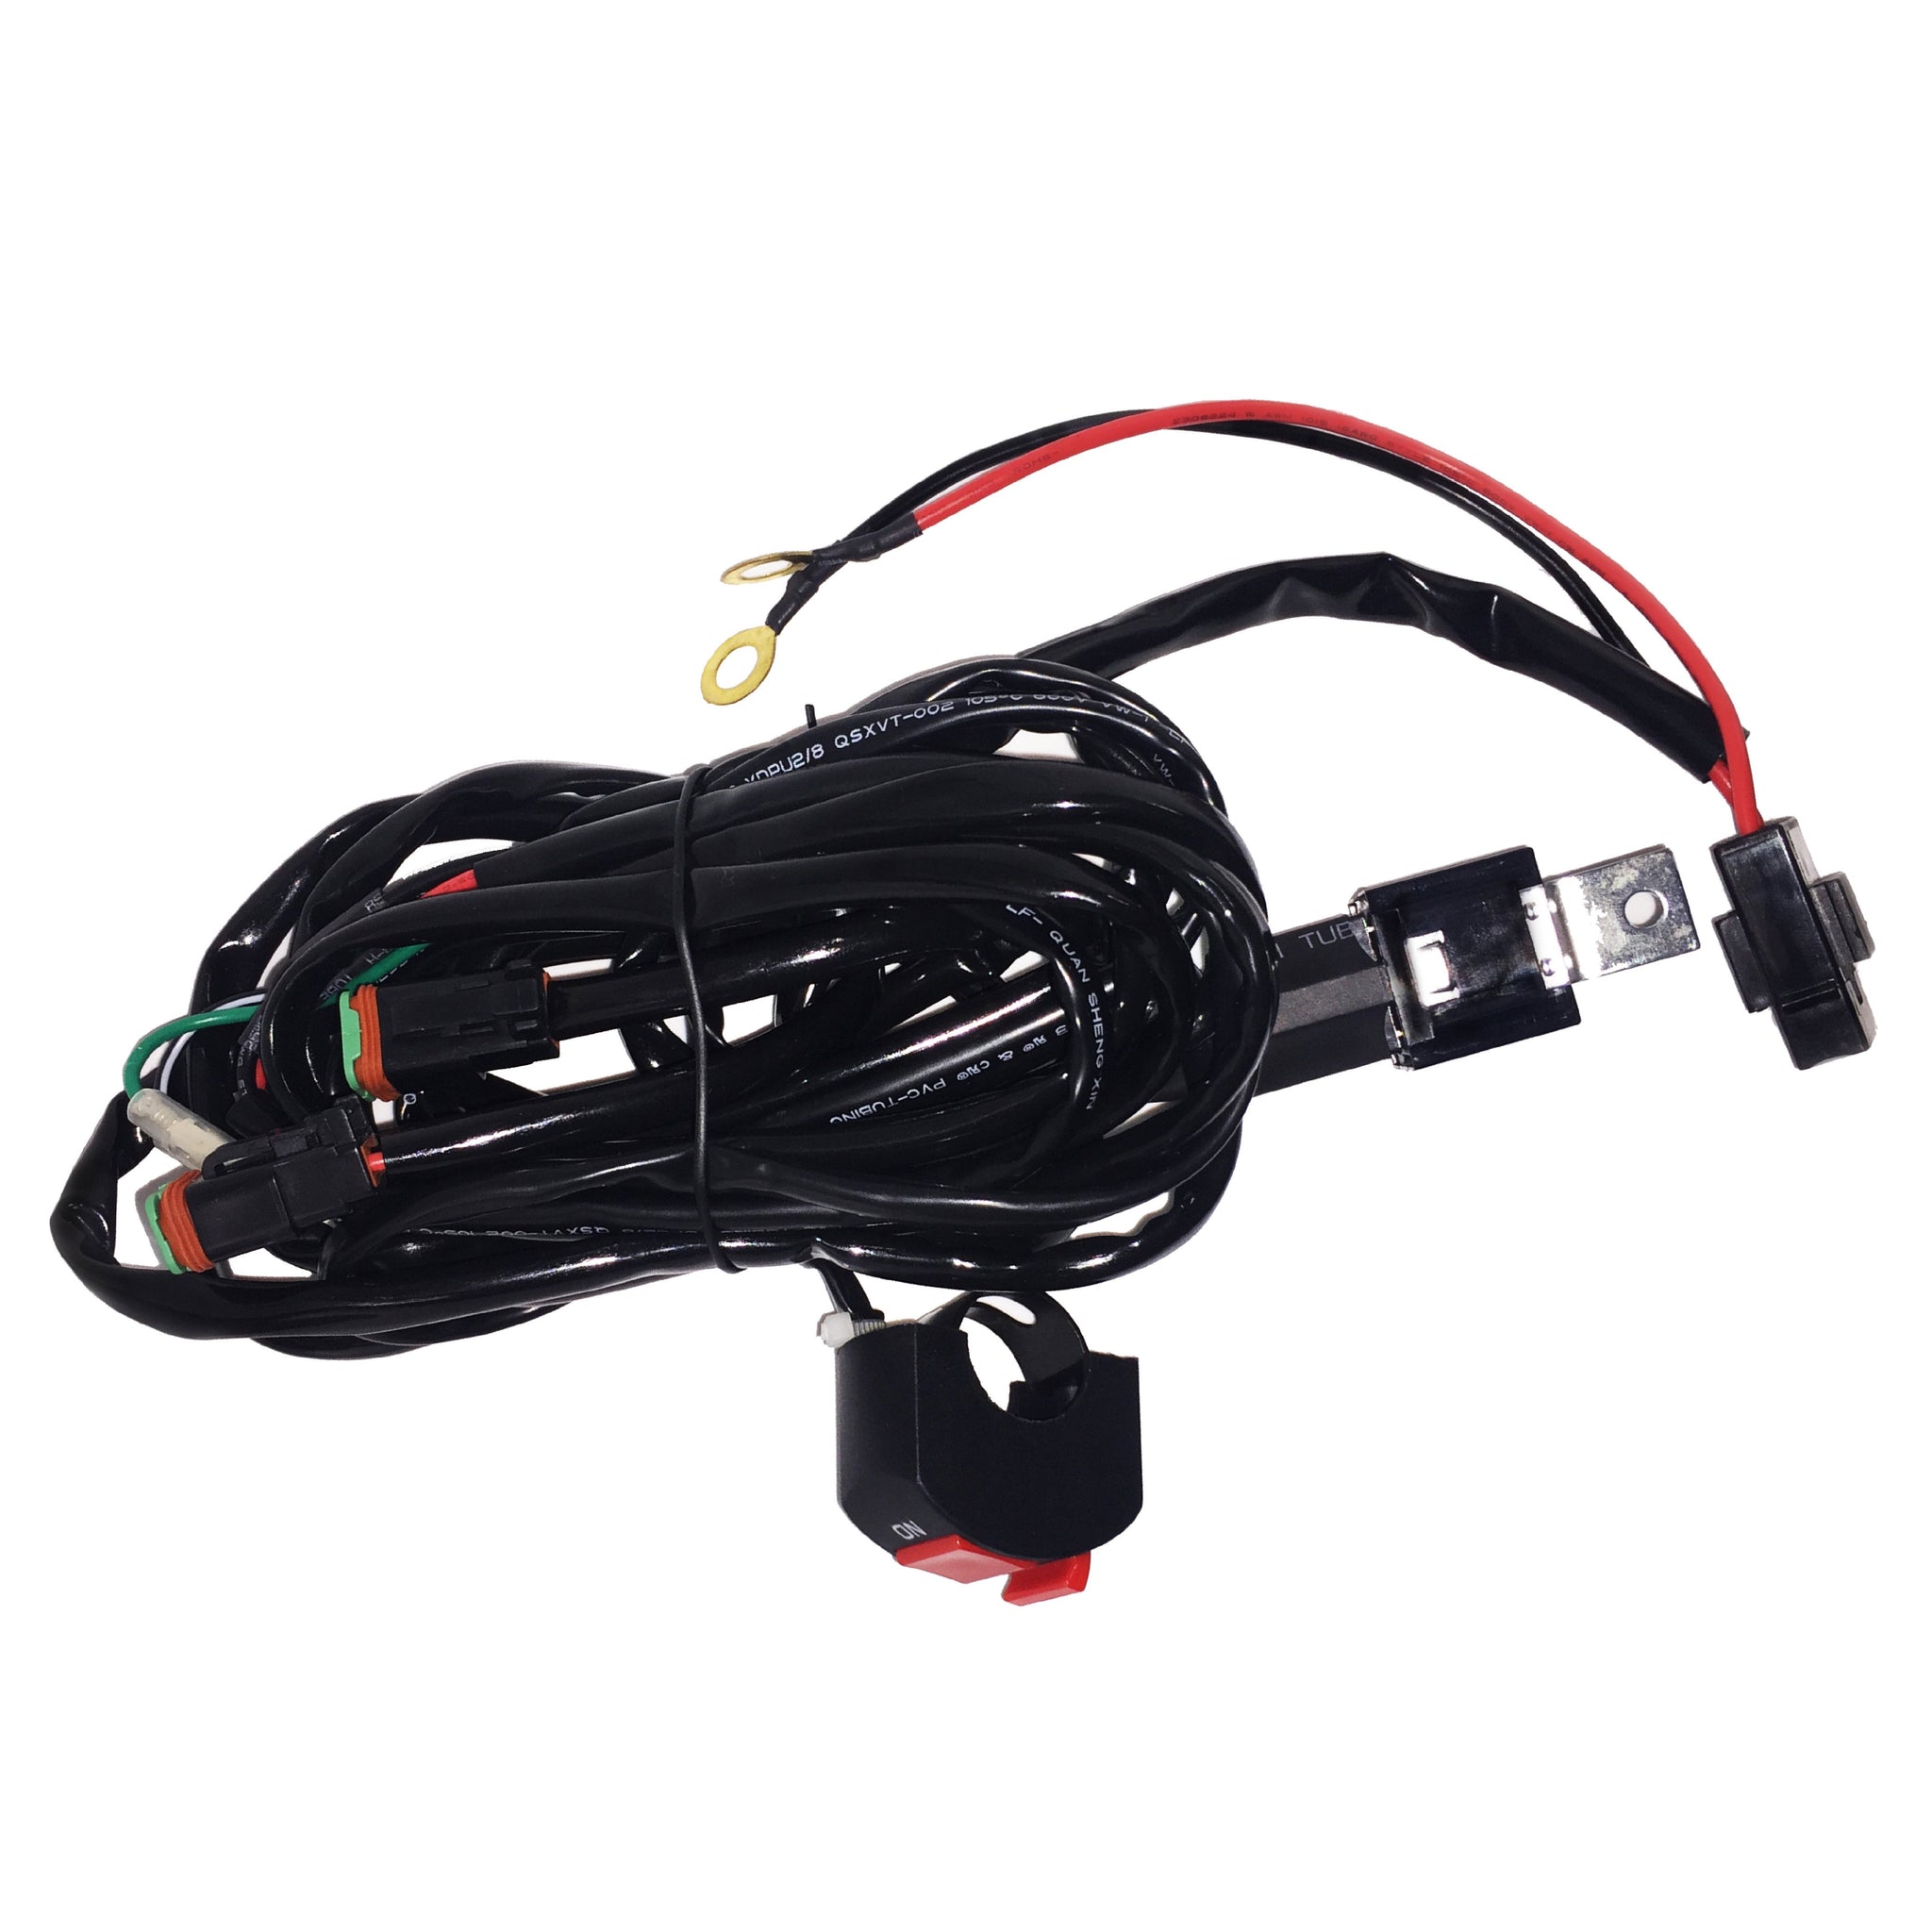 Motorbike Relay Wiring Harness For 2 X 10W Lights – Extreme Lights